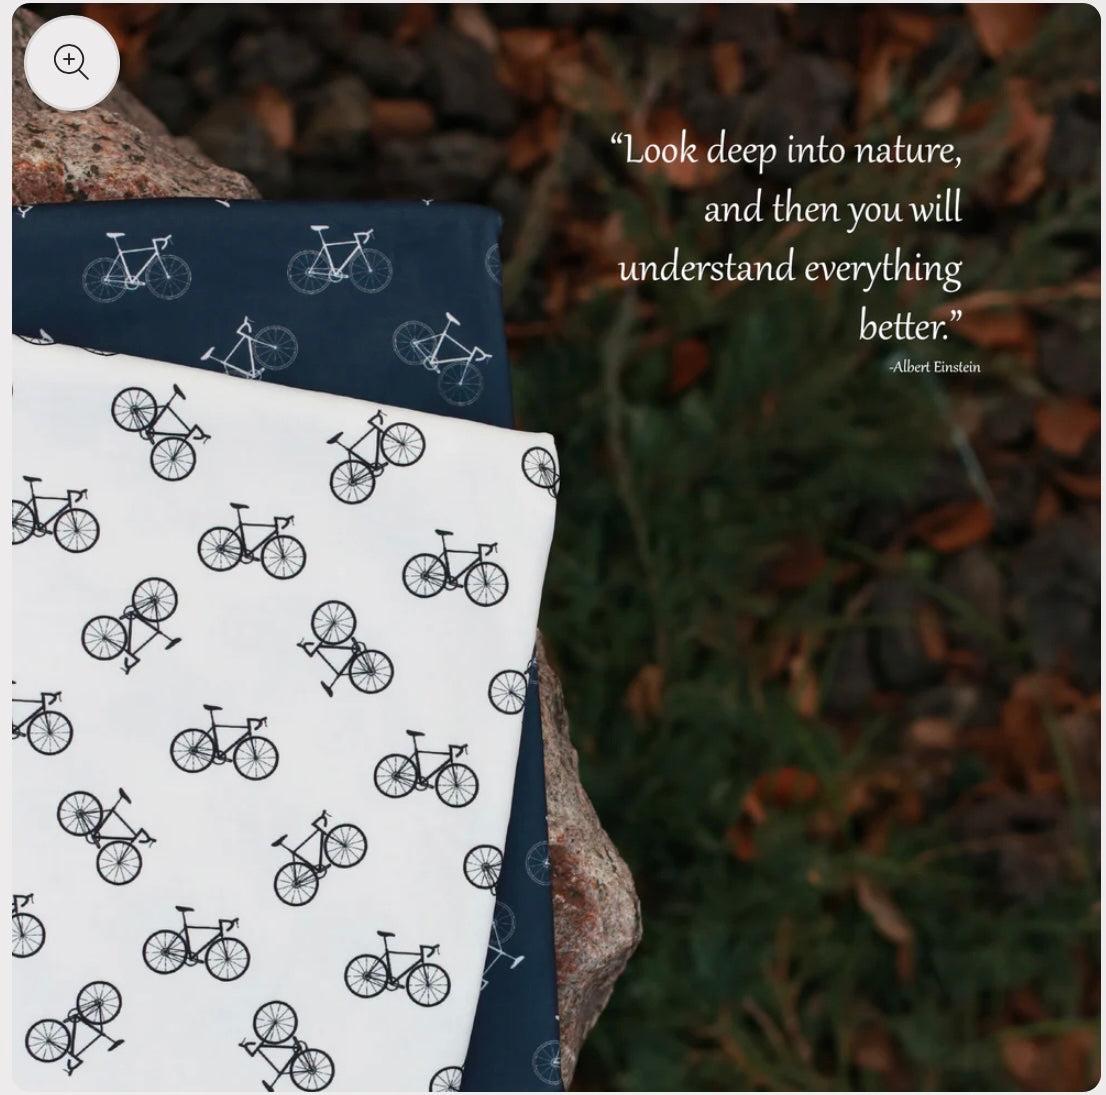 Bikes in Navy on Imitation Cotton Jersey Knit Fabric Sold by the 1/4 yard